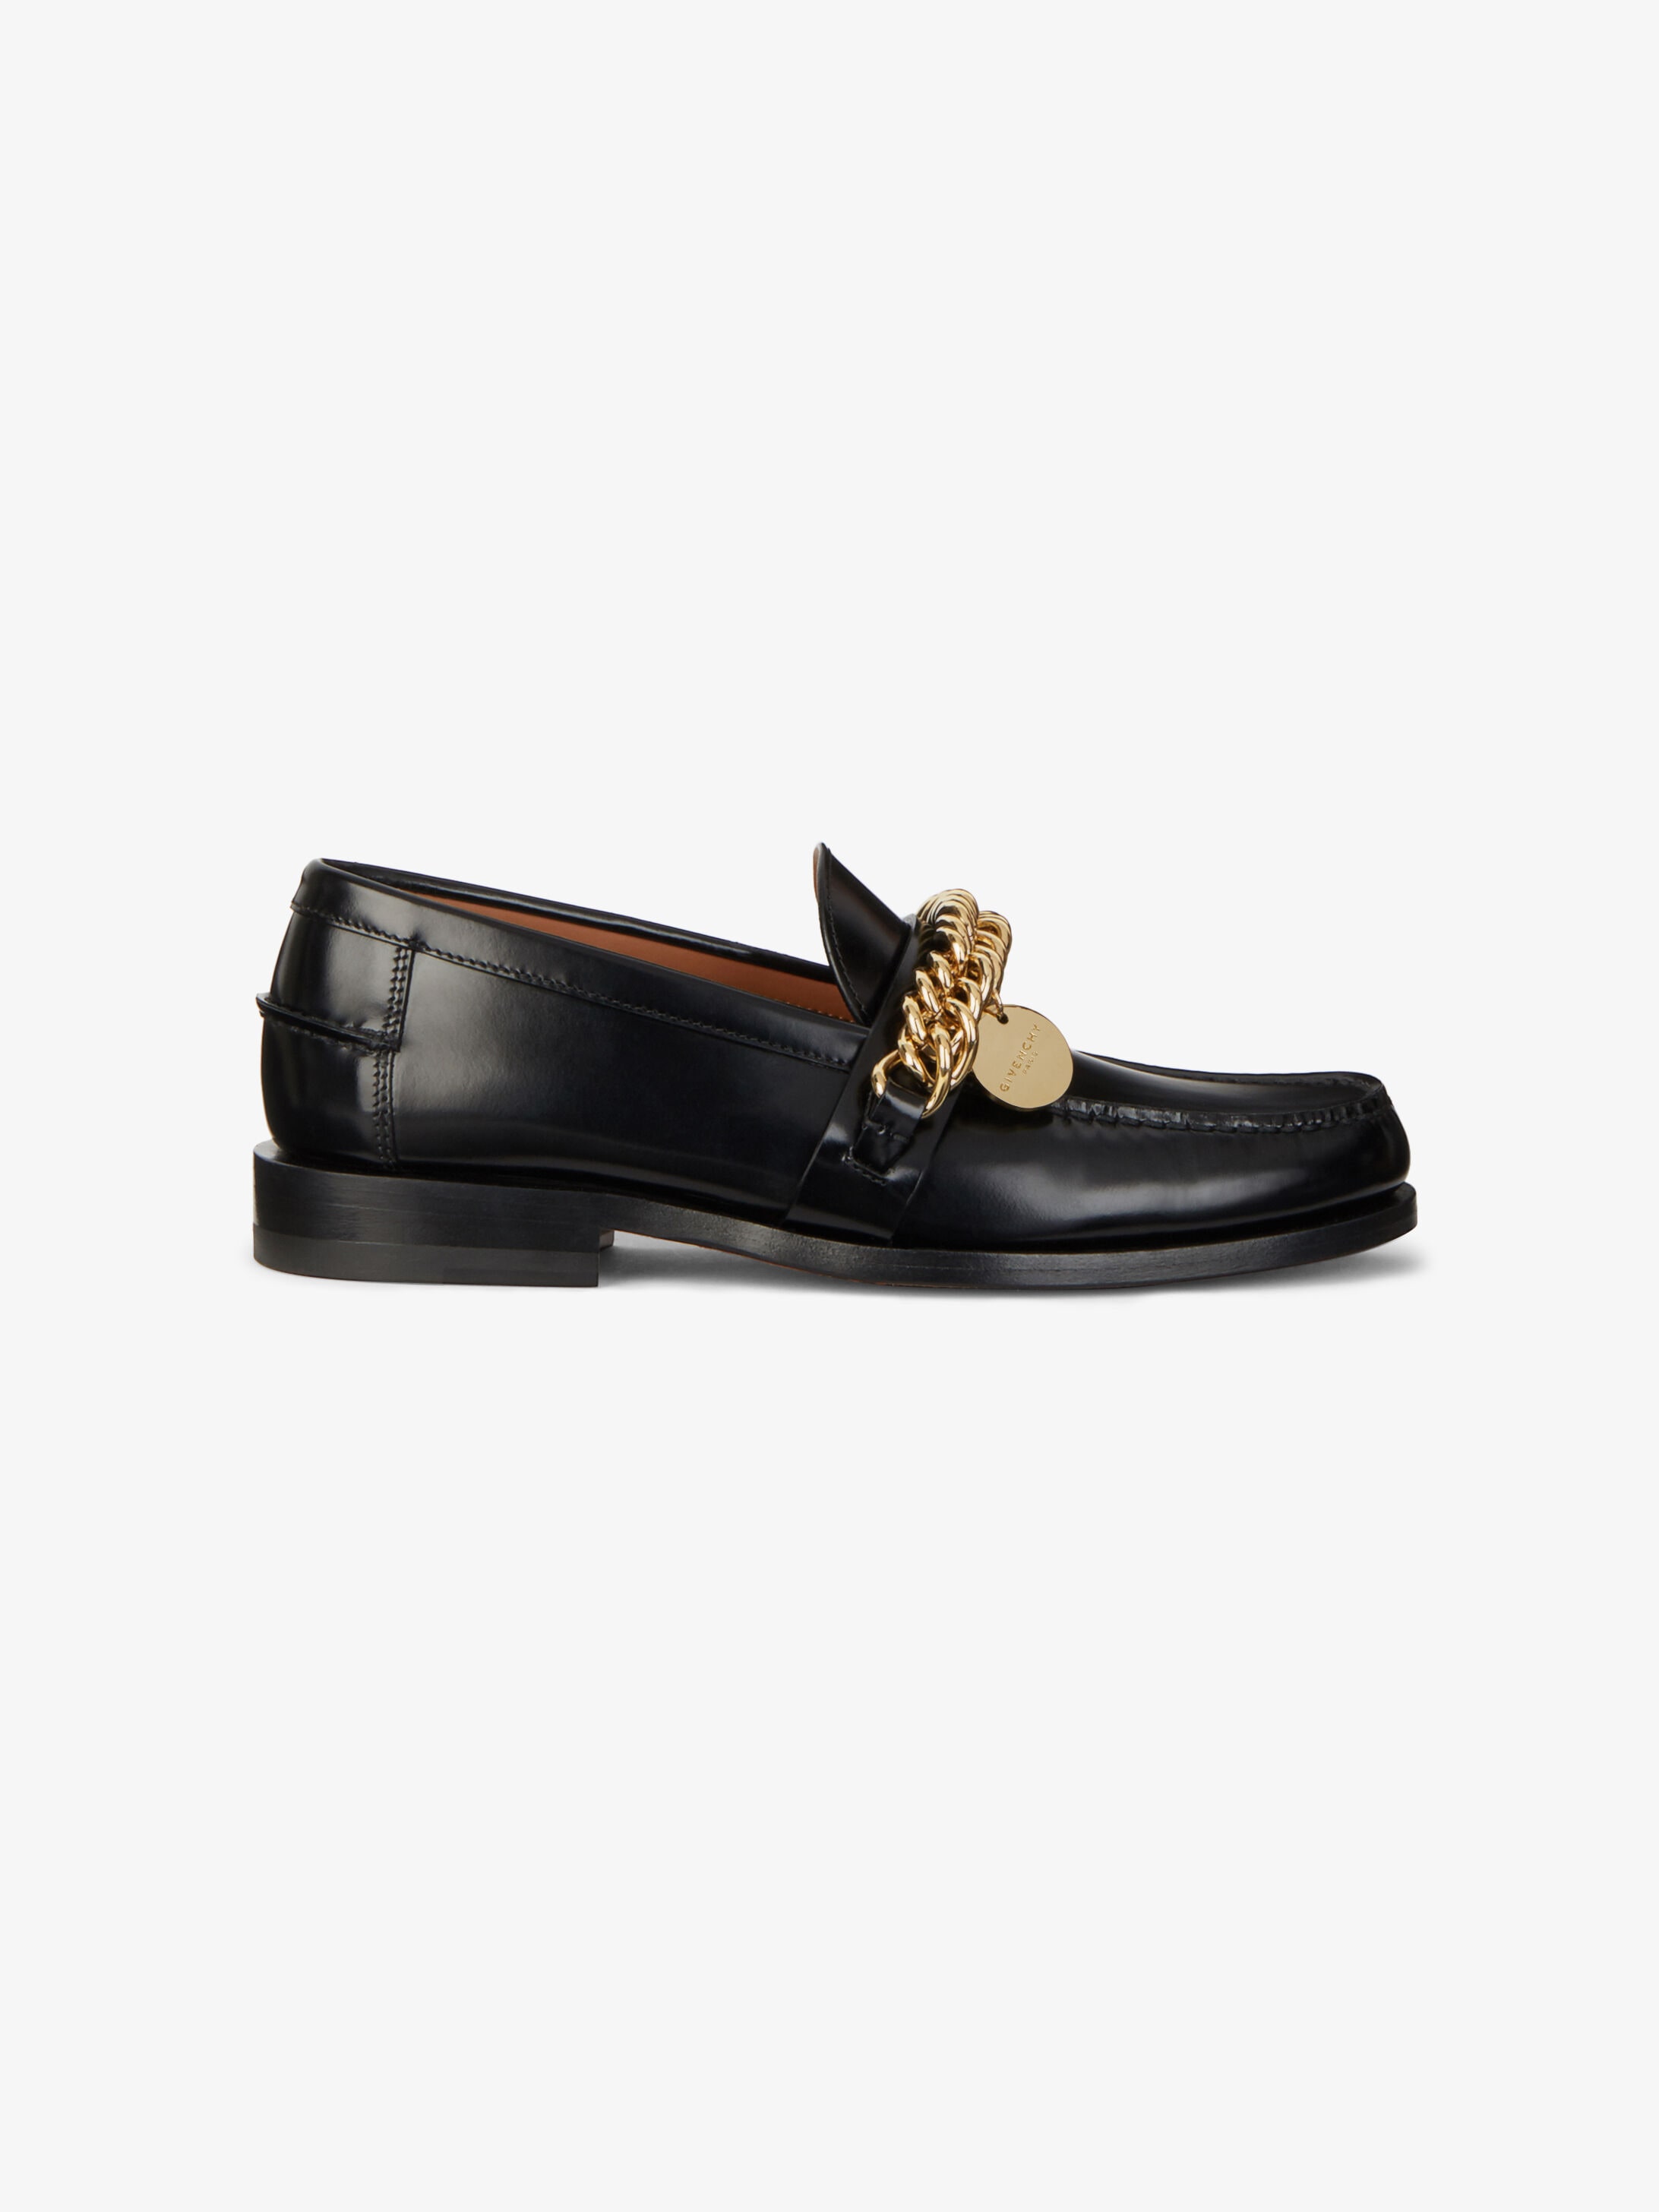 givenchy loafers women